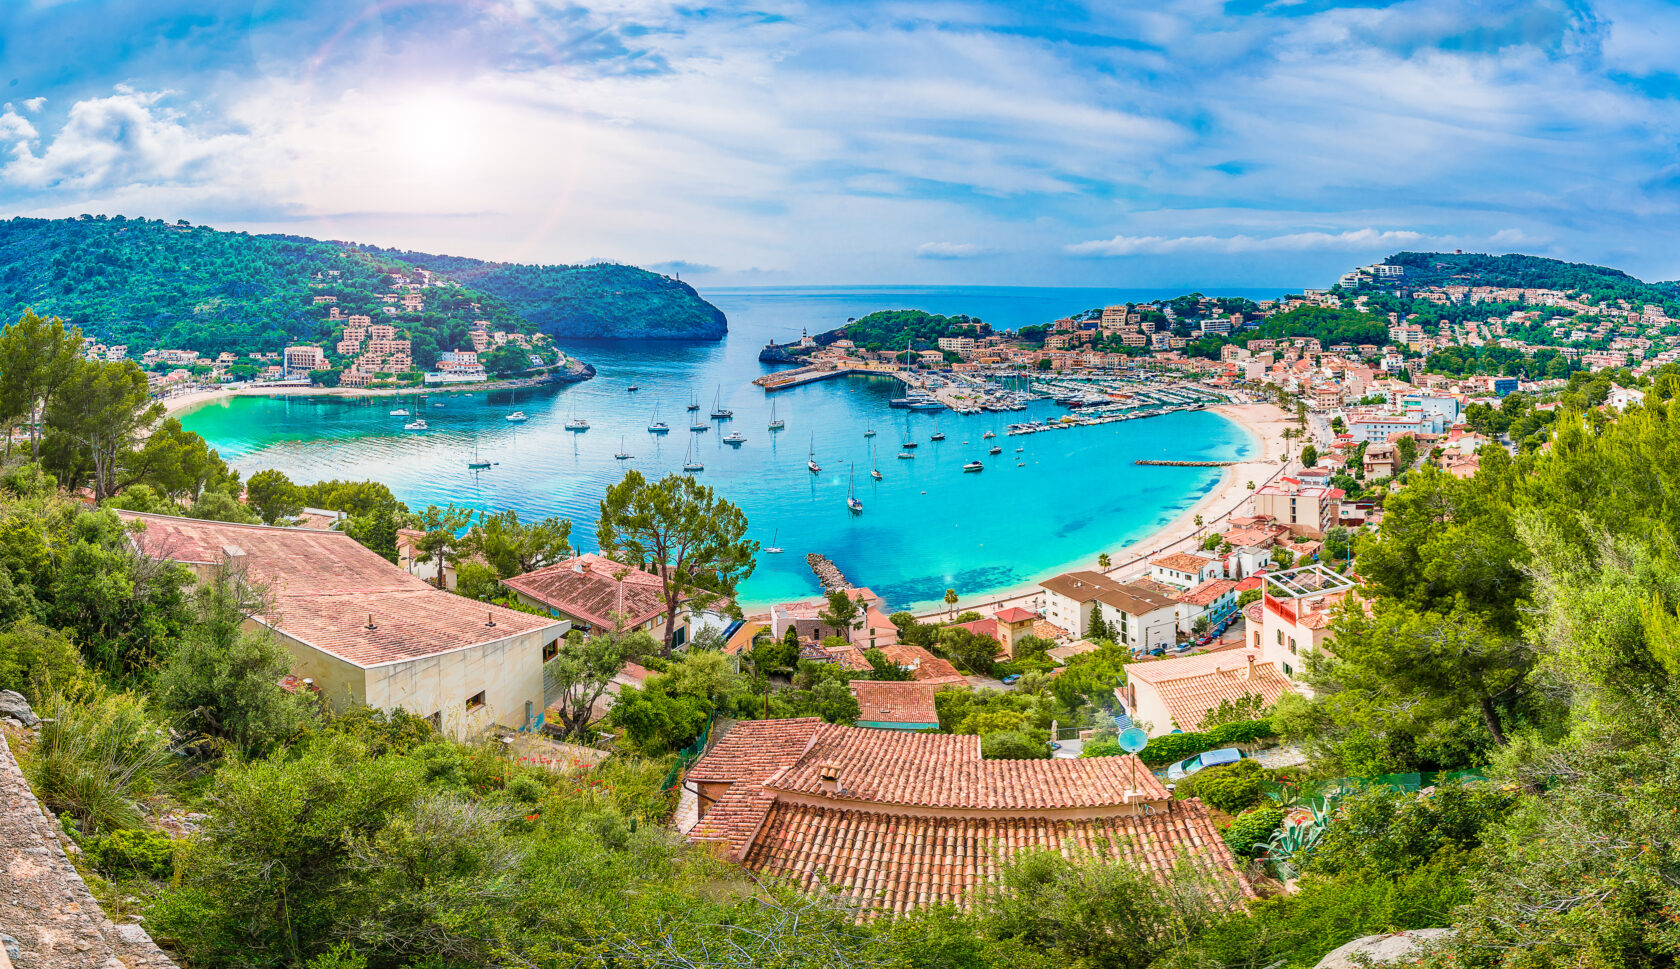 Panoramic view of a town on Mallorca Island (an Atlantis site).